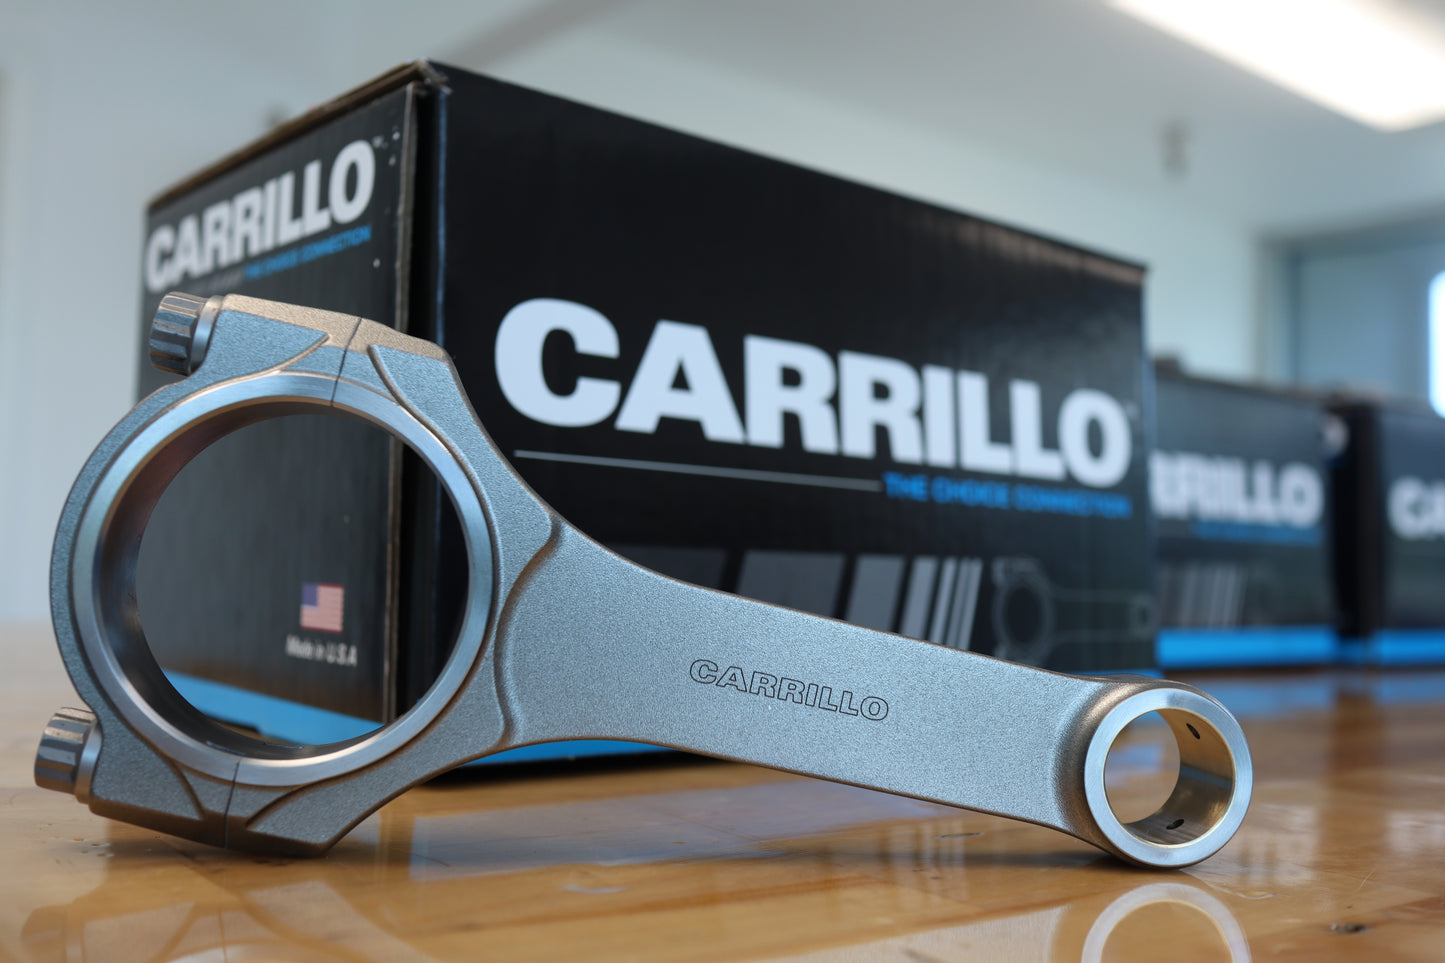 Carrillo - S54 Connecting Rod Set of 6